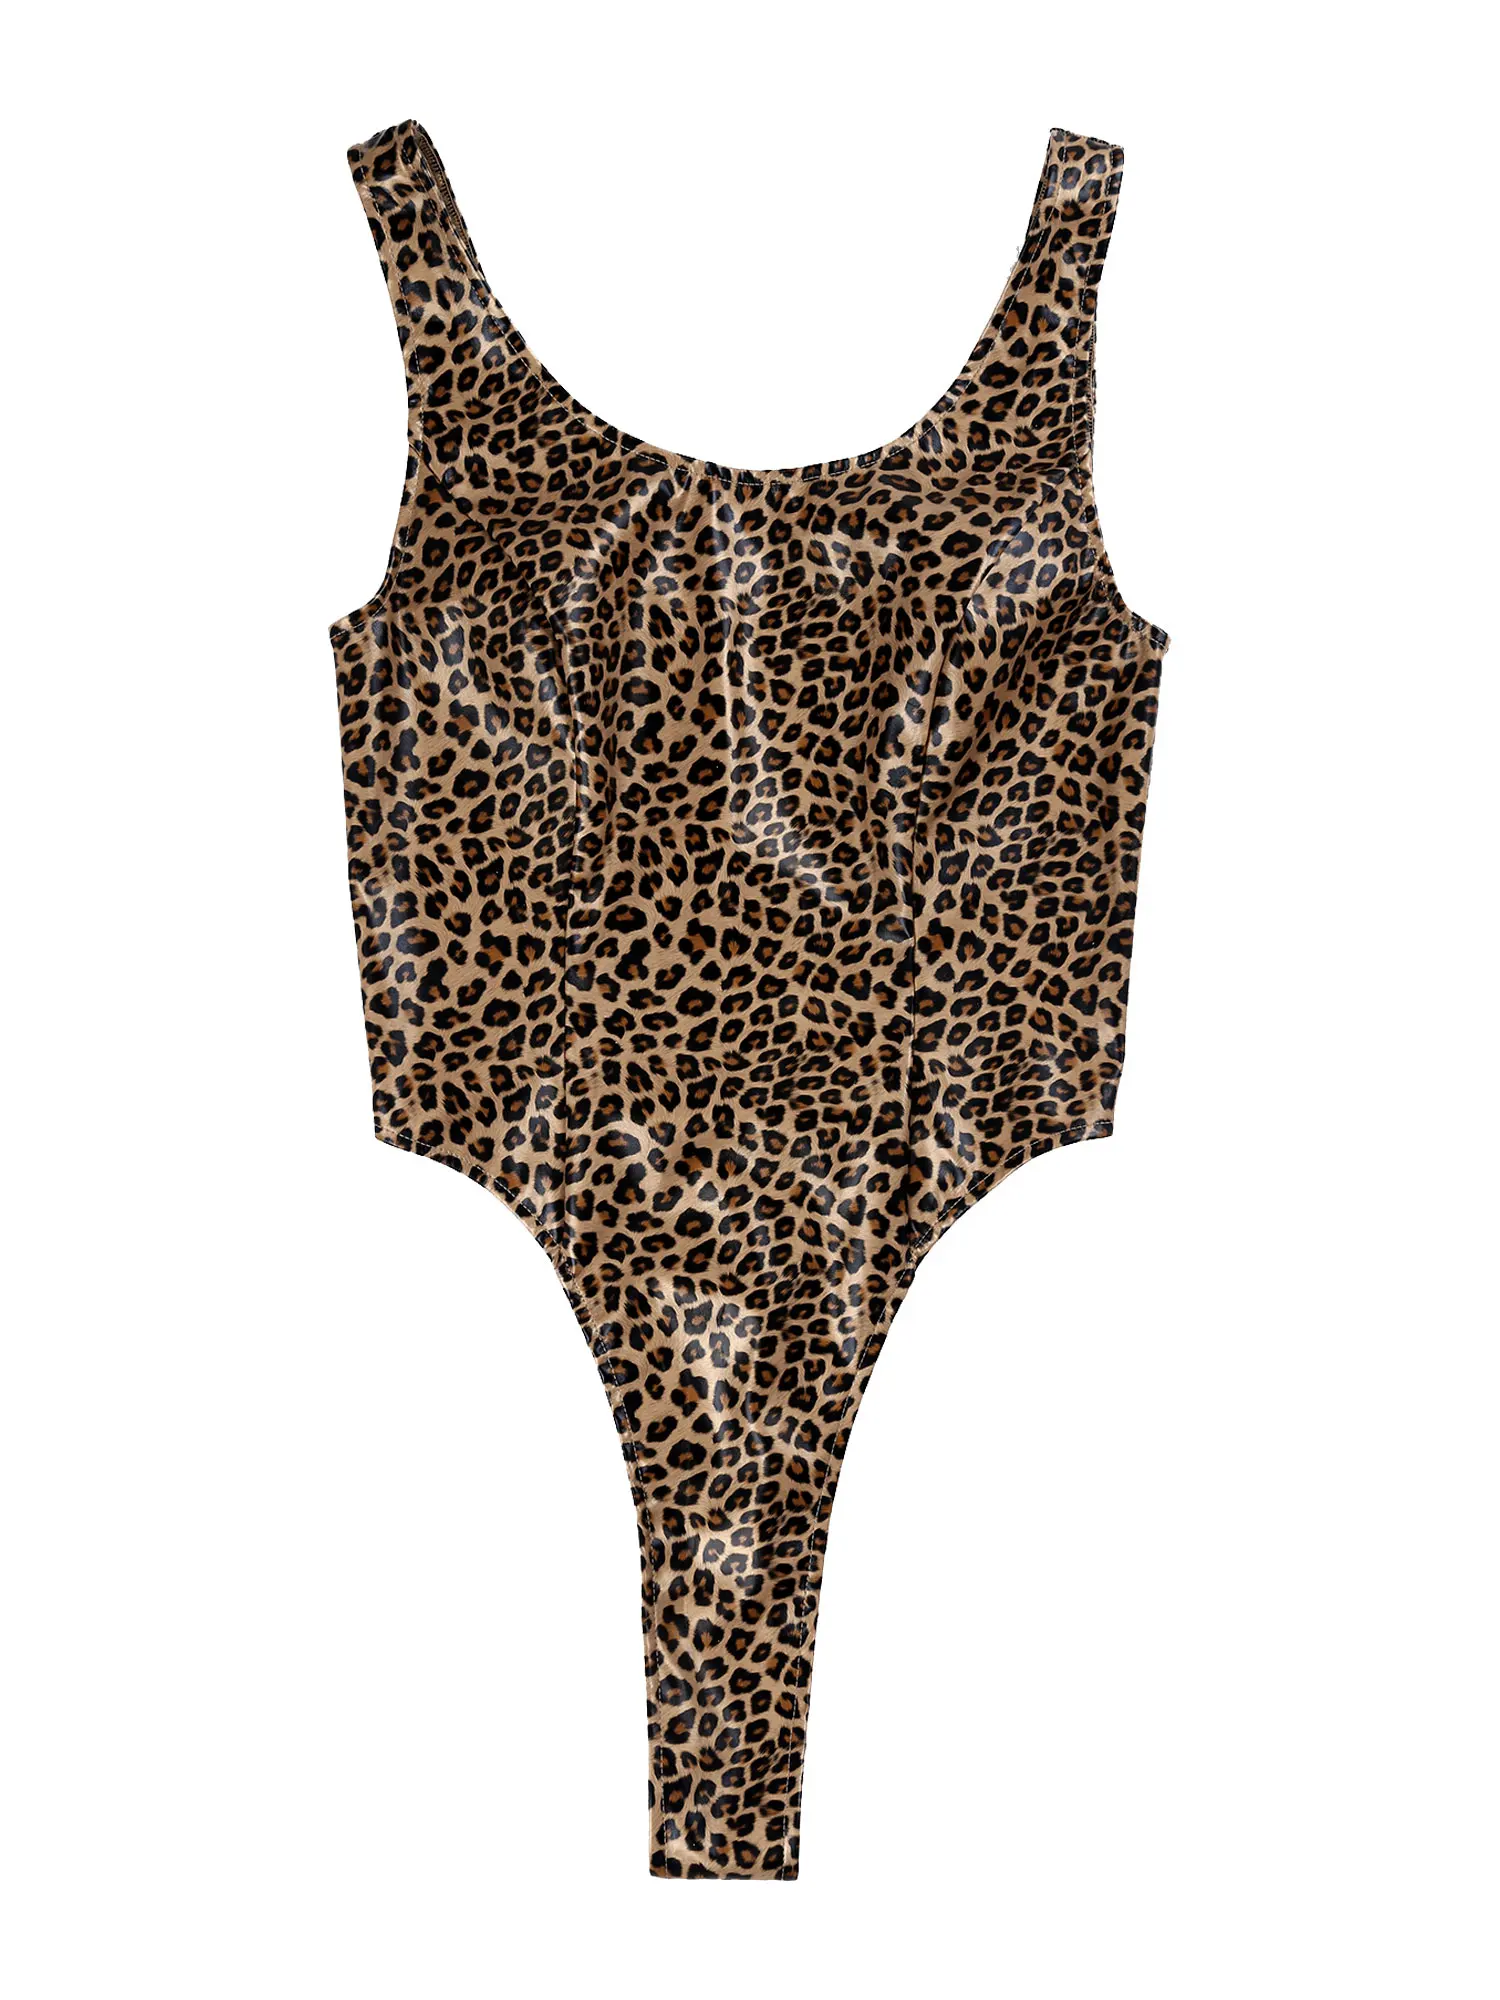 Out to hunt - Shiny Leopard Bodysuit / Swimsuit